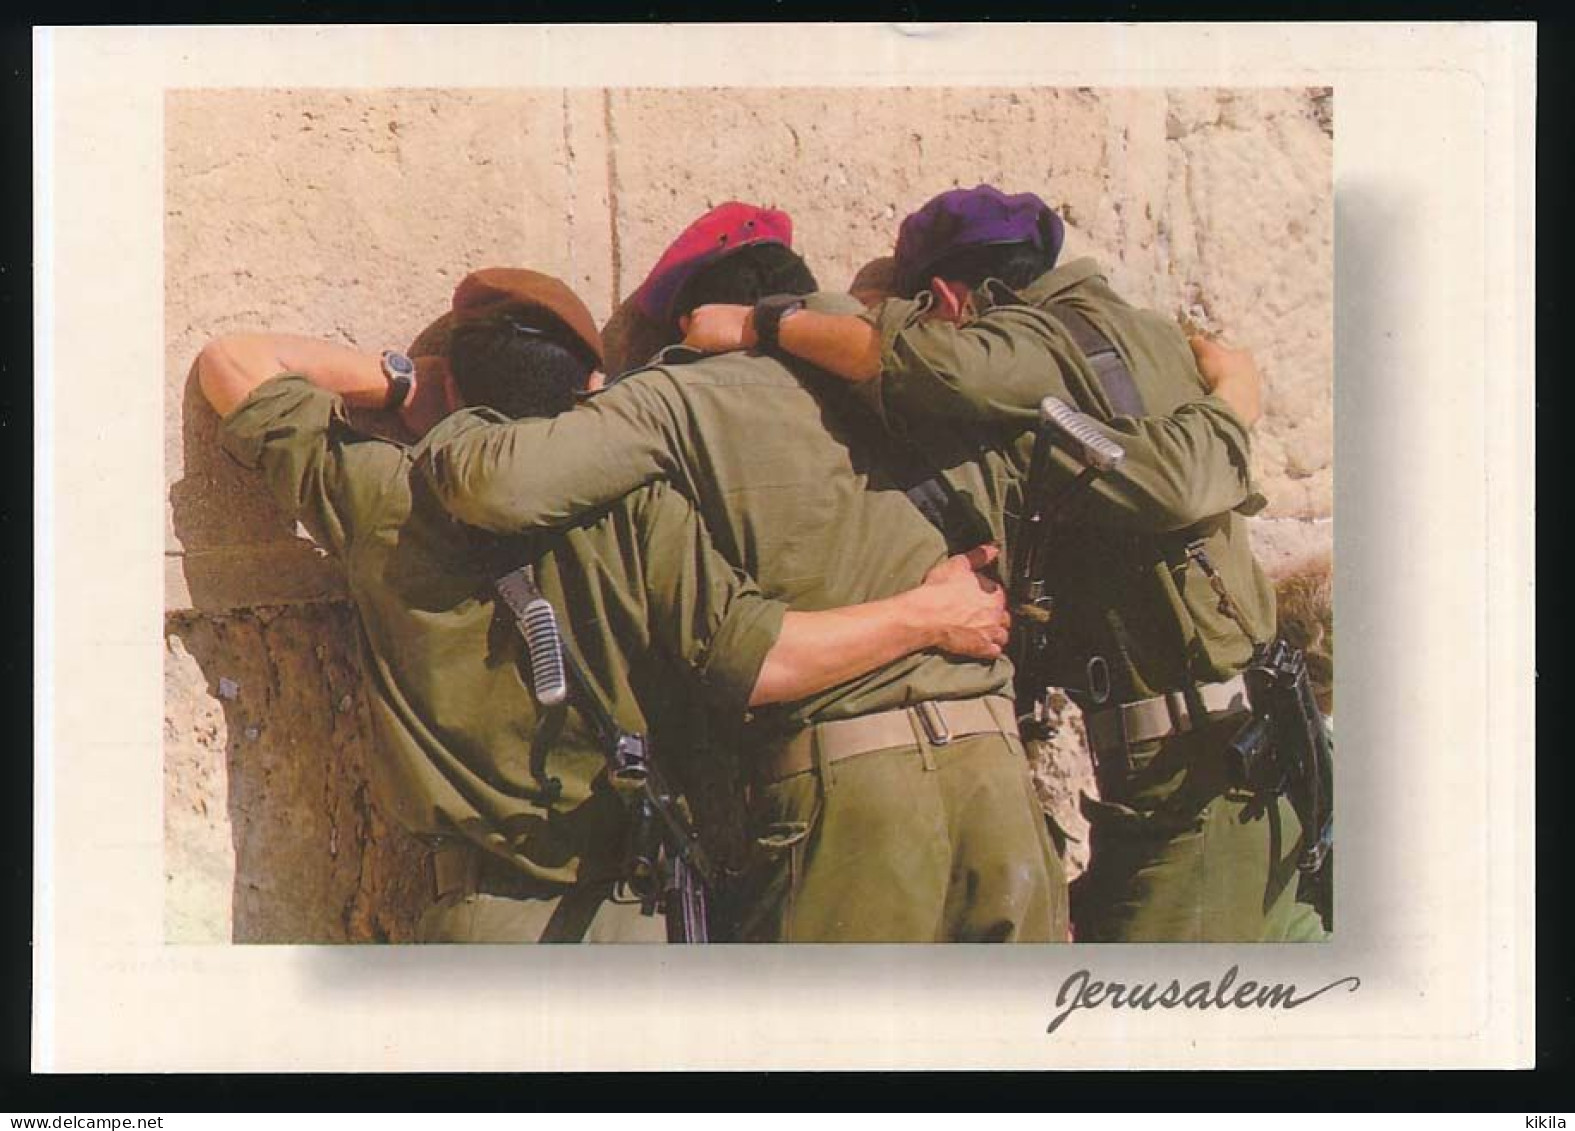 CPSM/PM 10.5x15 Israël (144) JERUSALEM Meeting Of Fighters At The Western Wall Réunion De Combattants Au Mur Occidental - Israel